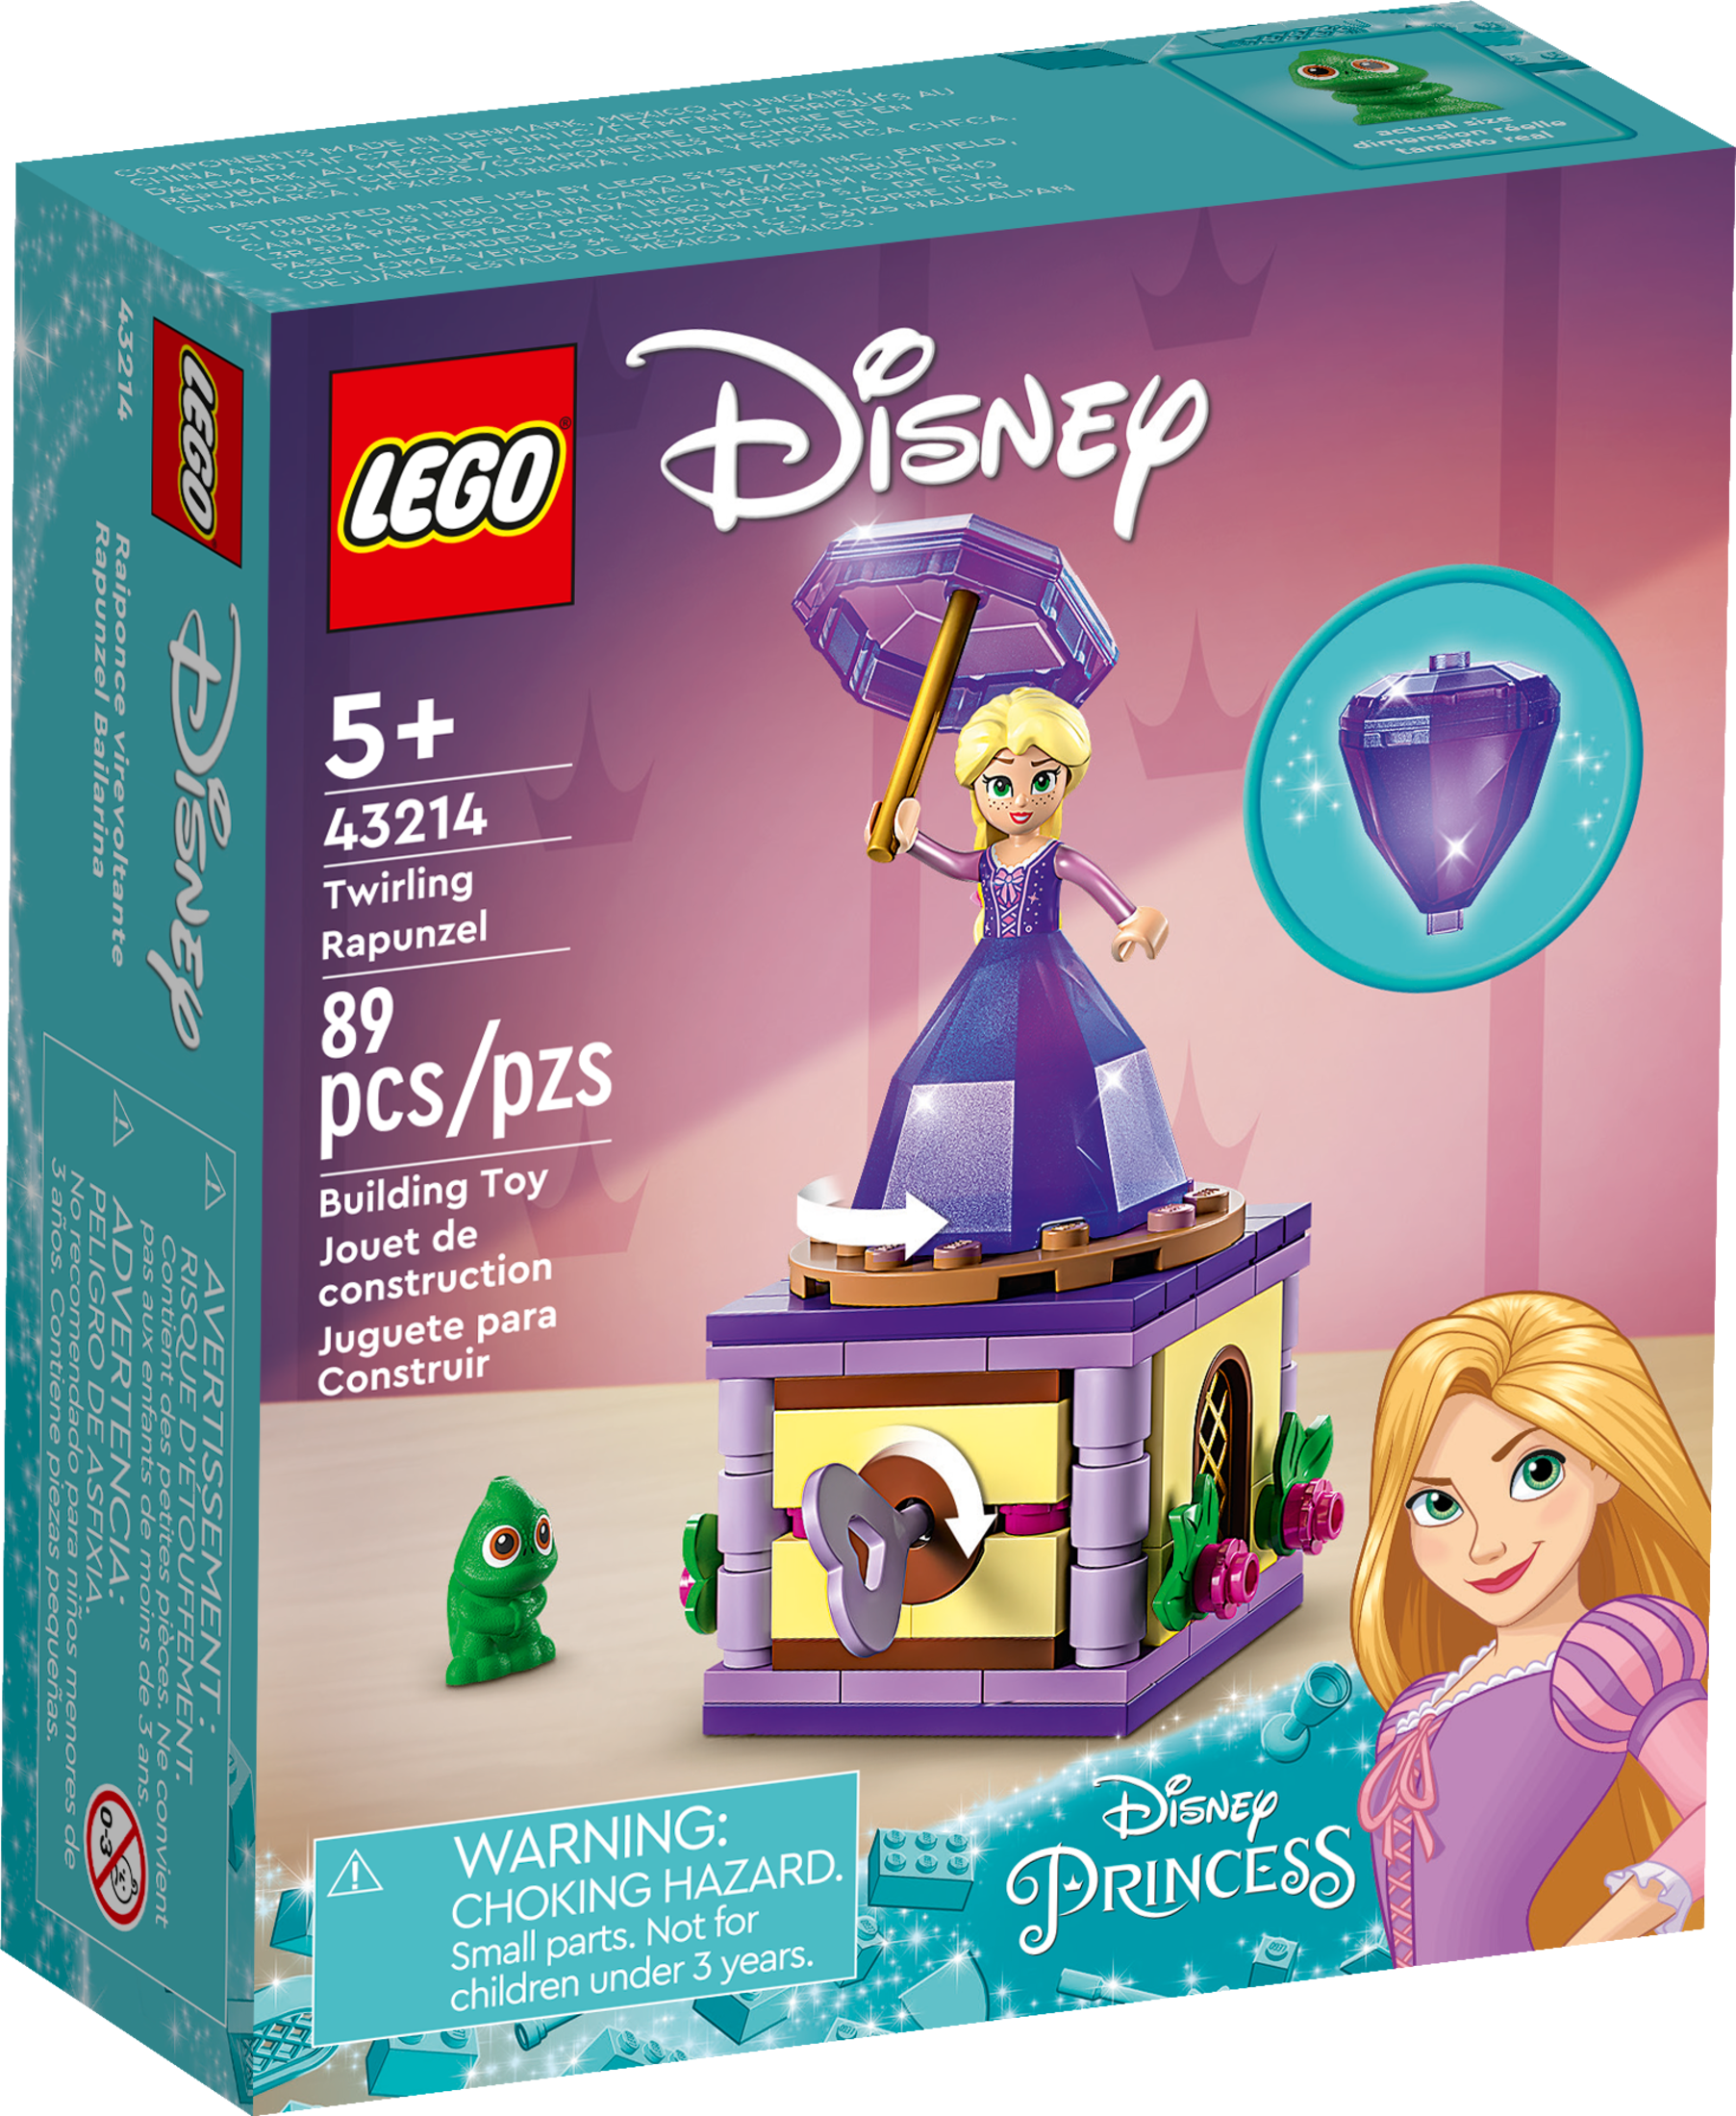 LEGO Disney Princess Twirling Rapunzel Building Toy 43214, with Diamond Dress Mini-Doll and Pascal The Chameleon Figure, Wind Up Toy Rapunzel, Disney Collectible Toy for Girls & Boys Age 5+ Years Old - image 3 of 8